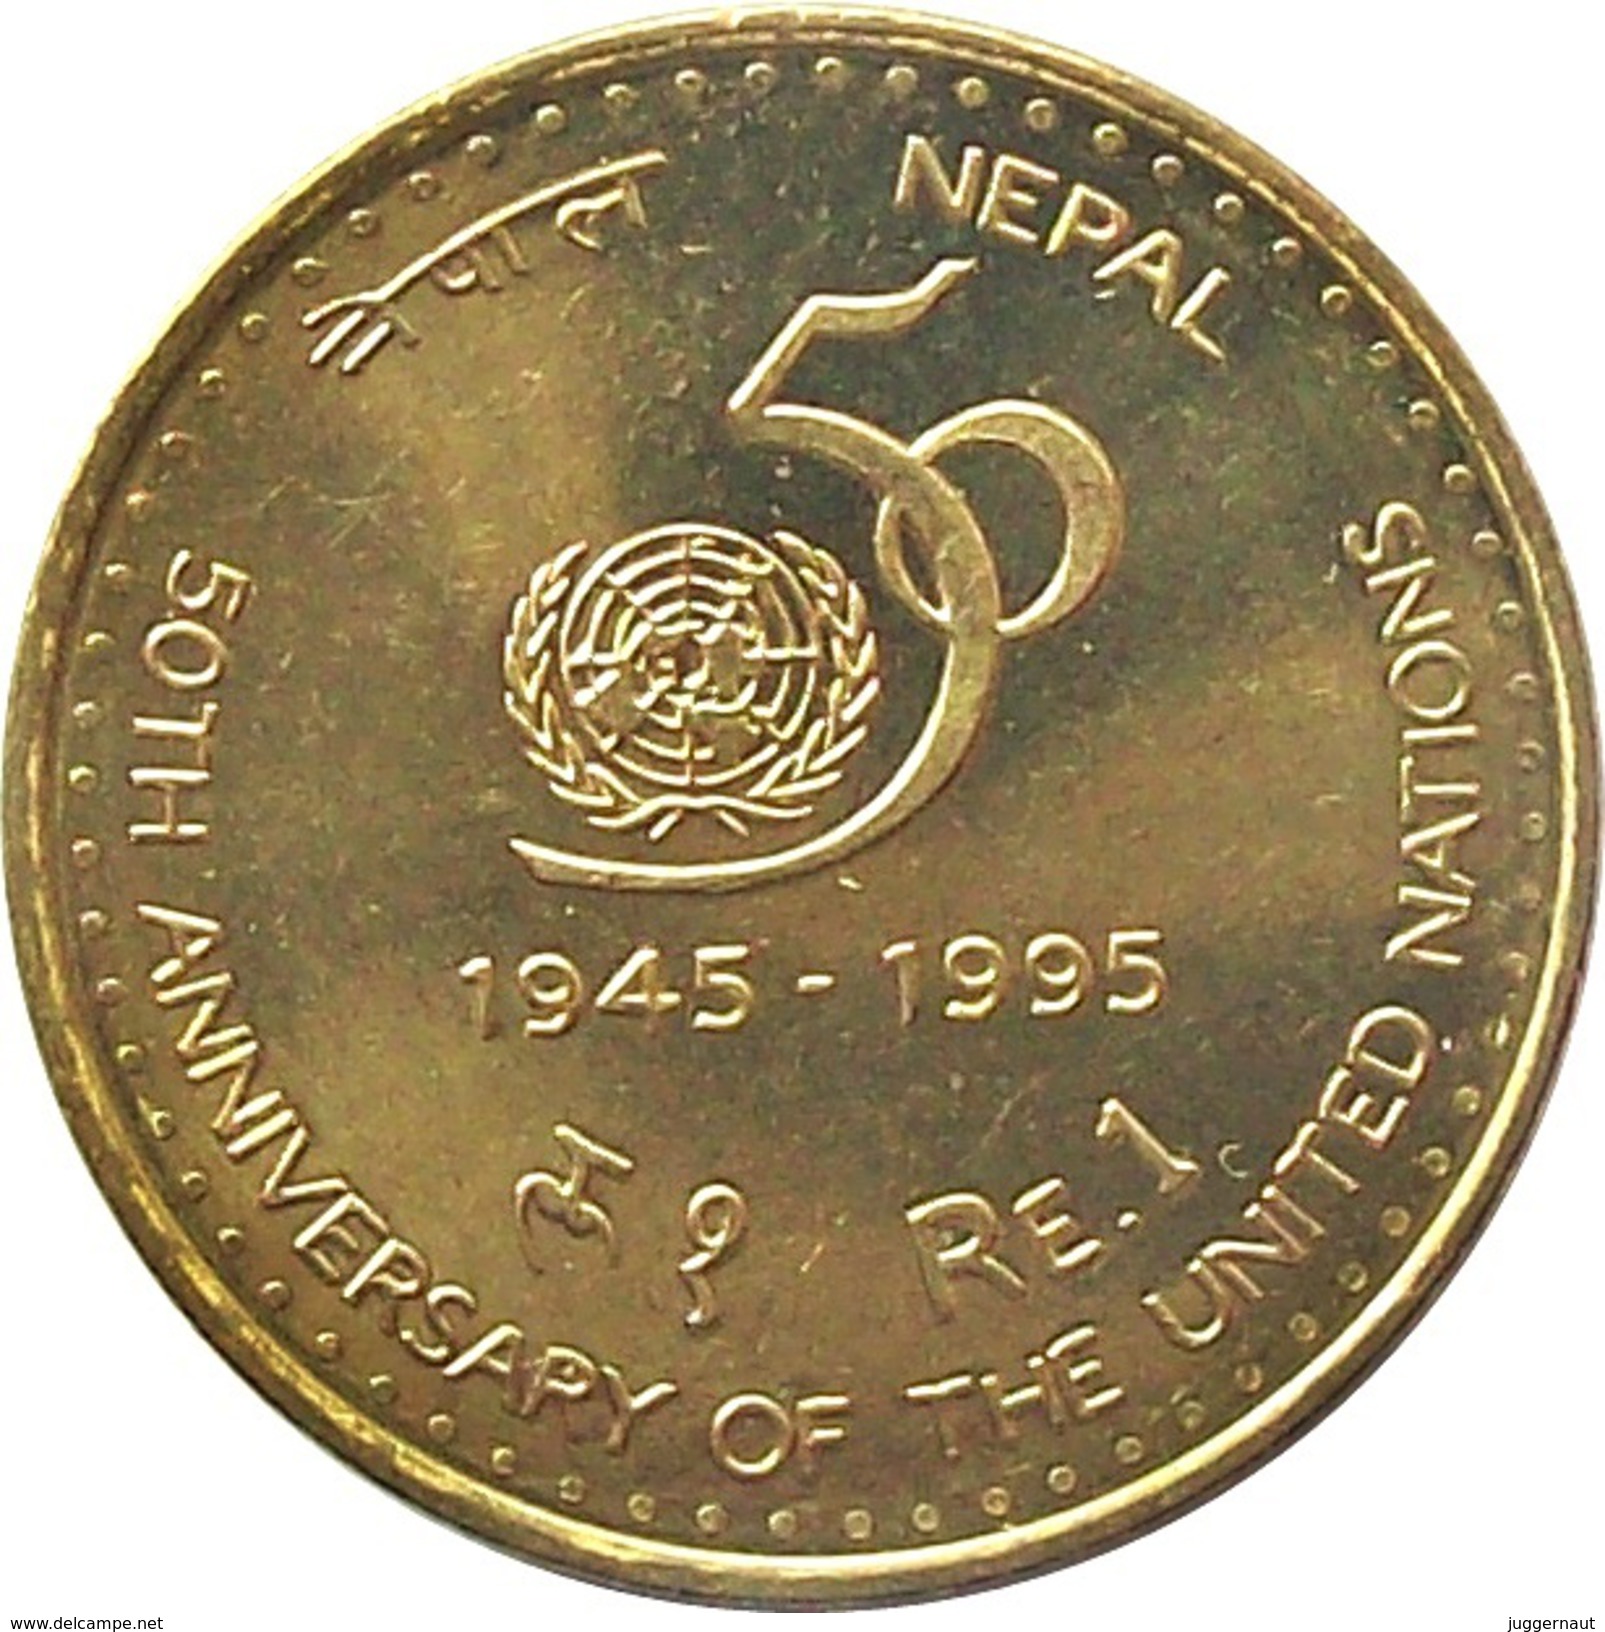 UNITED NATIONS GOLDEN JUBILEE RUPEE 1 BRASS-STEEL COIN NEPAL 1995 KM-1092 UNCIRCULATED UNC - Népal